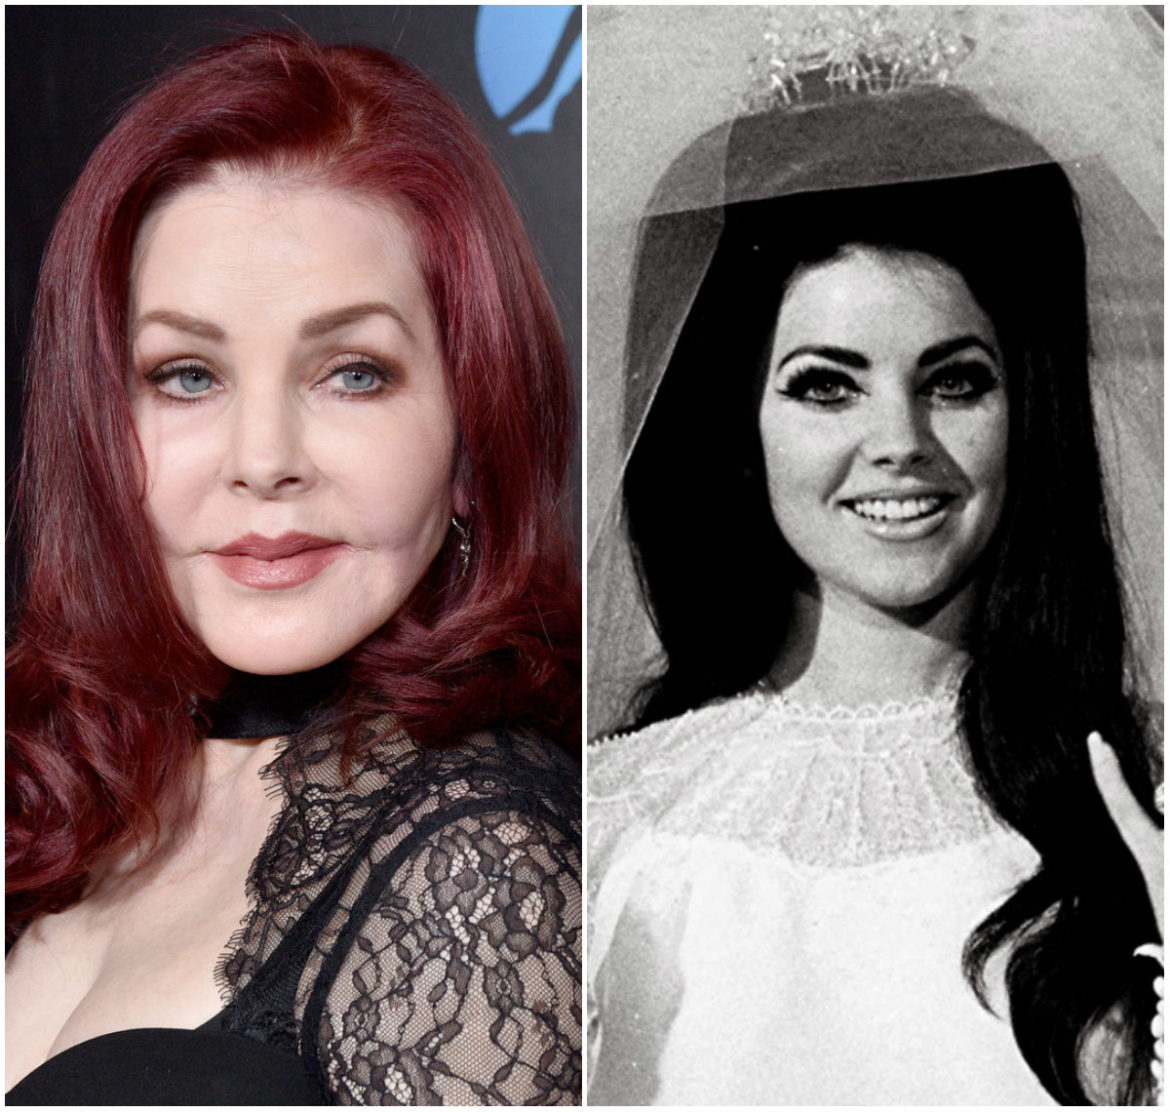 Priscilla Presley at 74 Looks the Same as on Her Wedding Day 53 Years Ago.